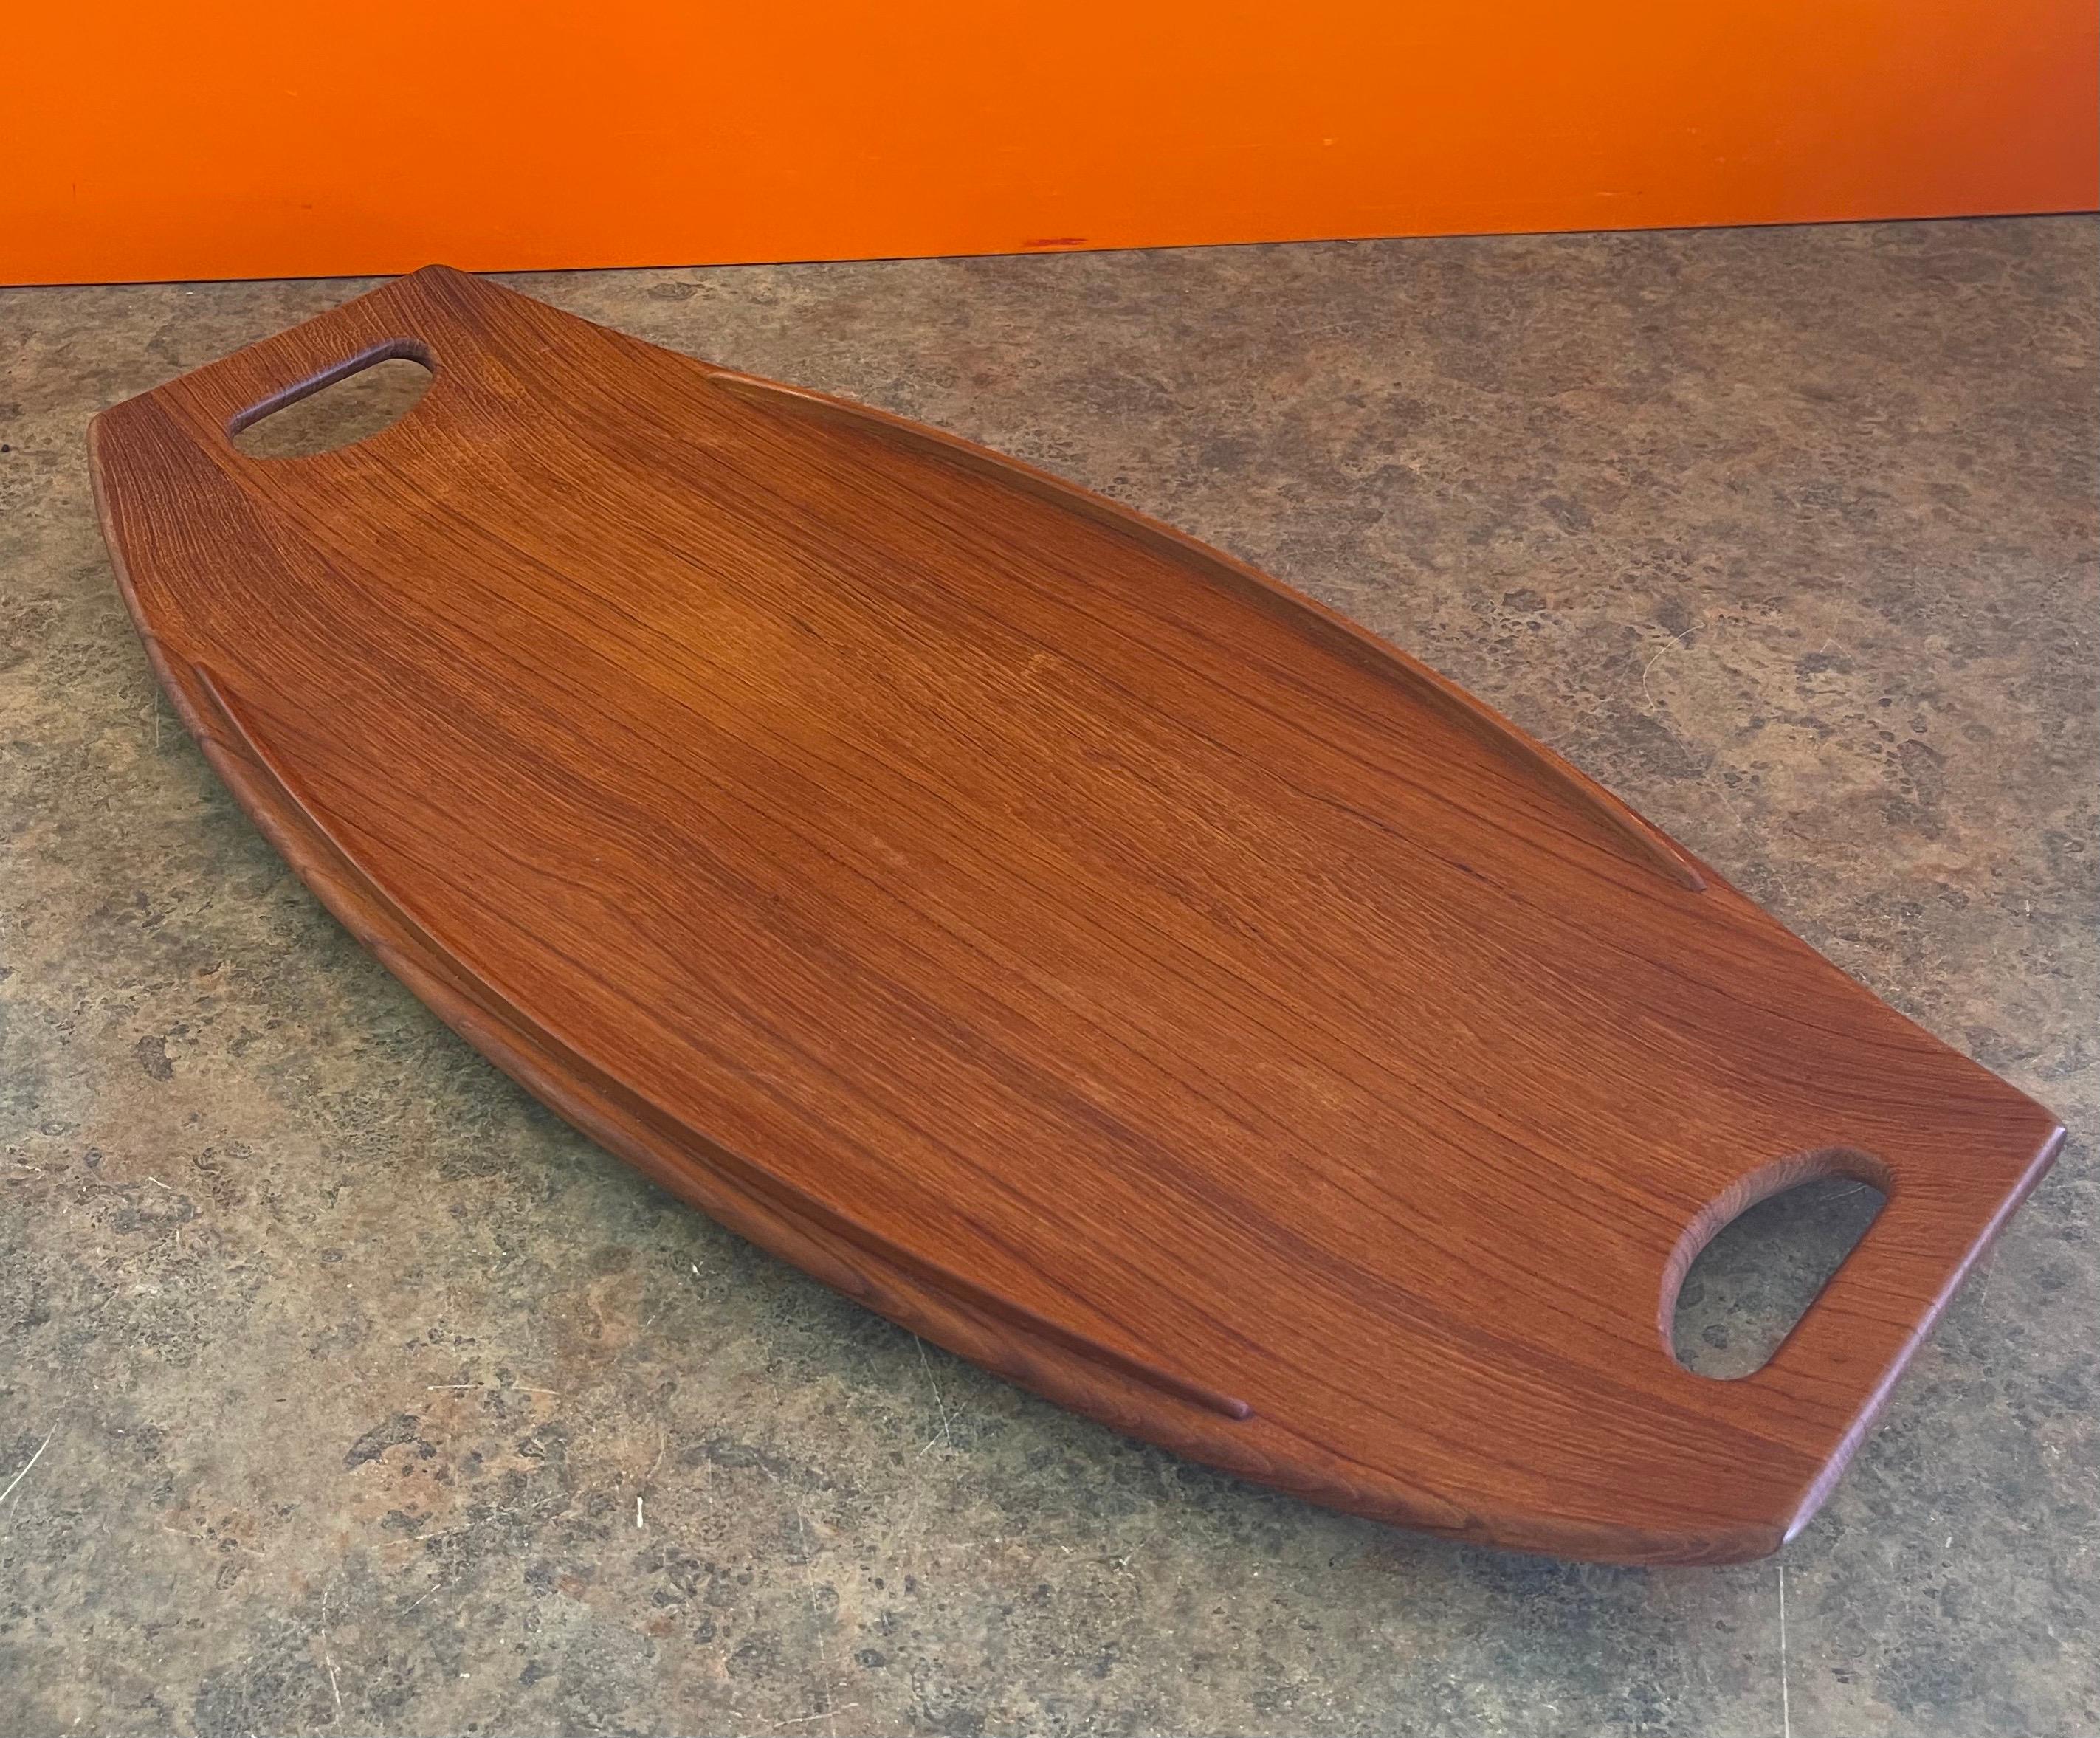 Large Teak Gondola Tray by Jens Quistgaard for Dansk, Early Production 1